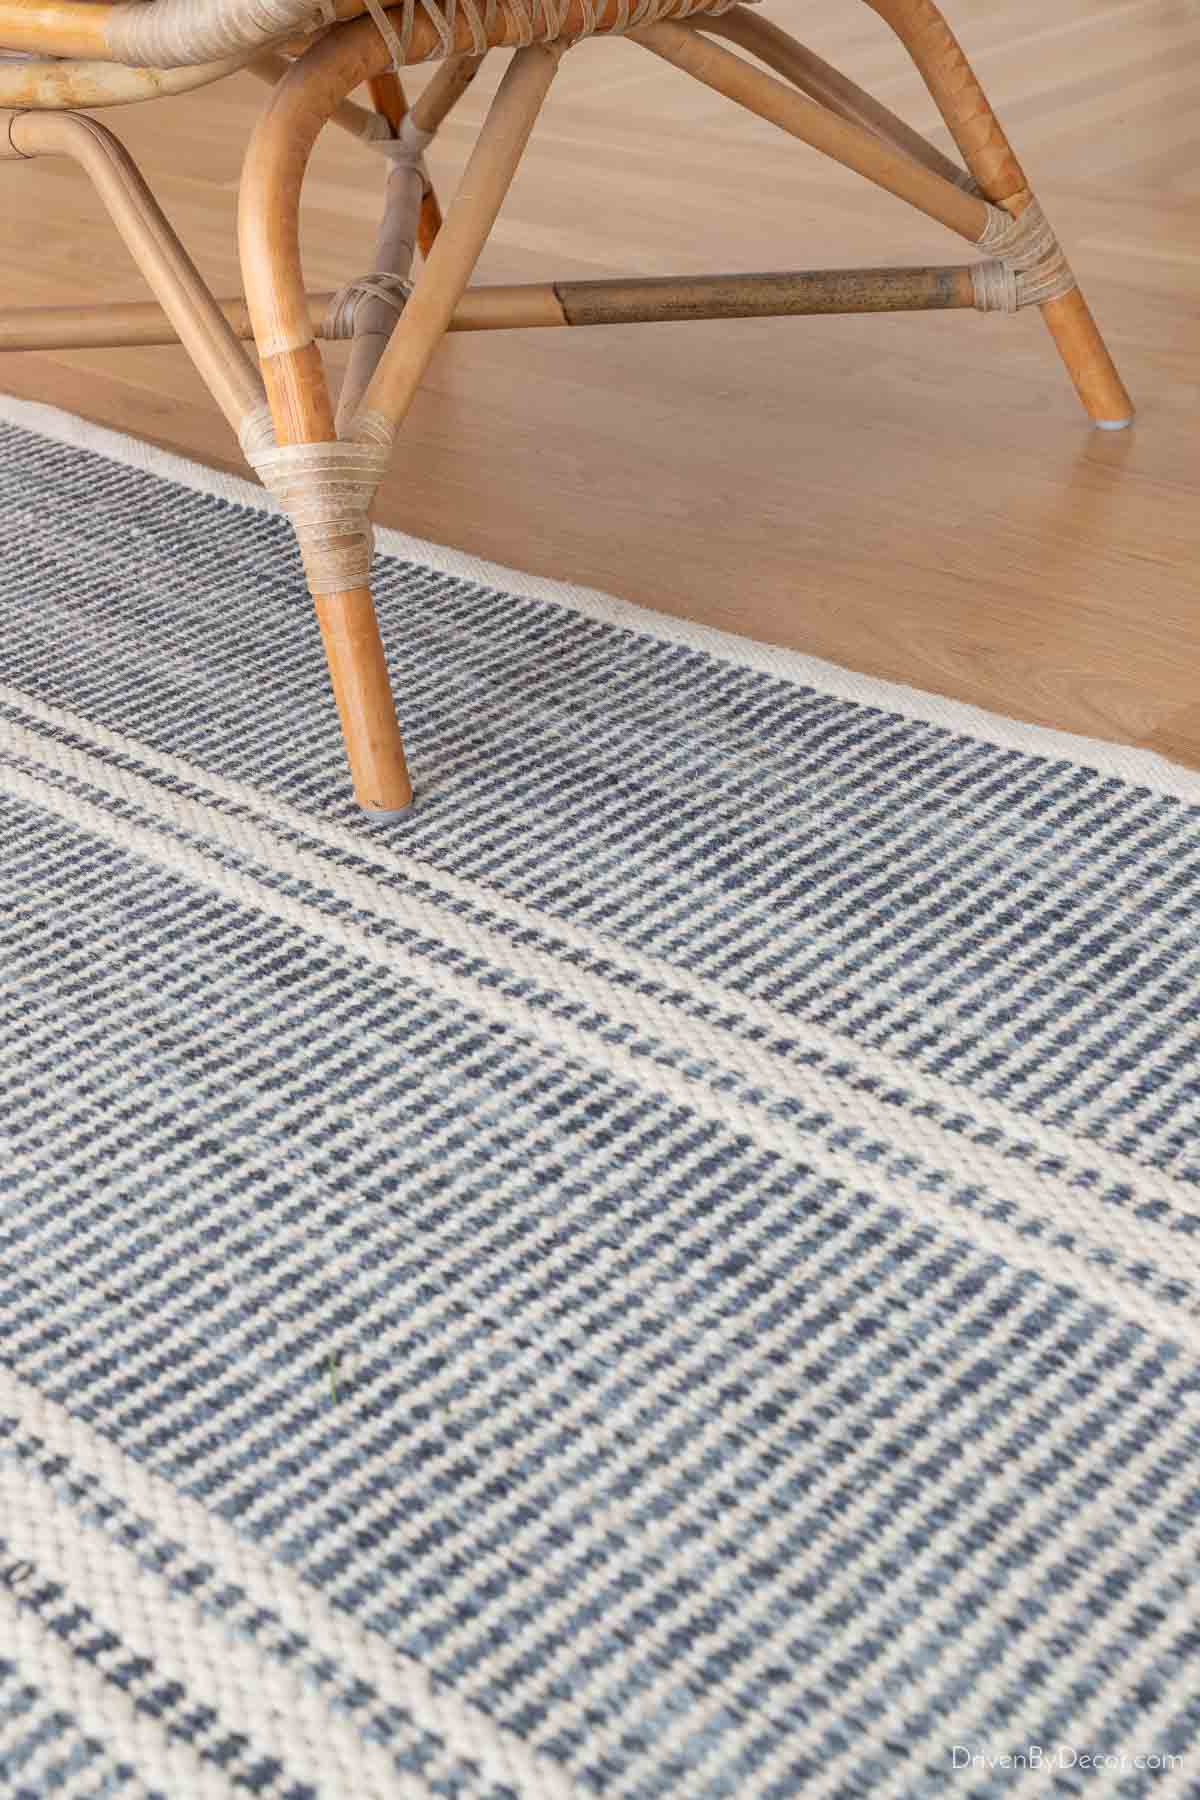 ⅓ of chair on rug - showing correct size of living room rug